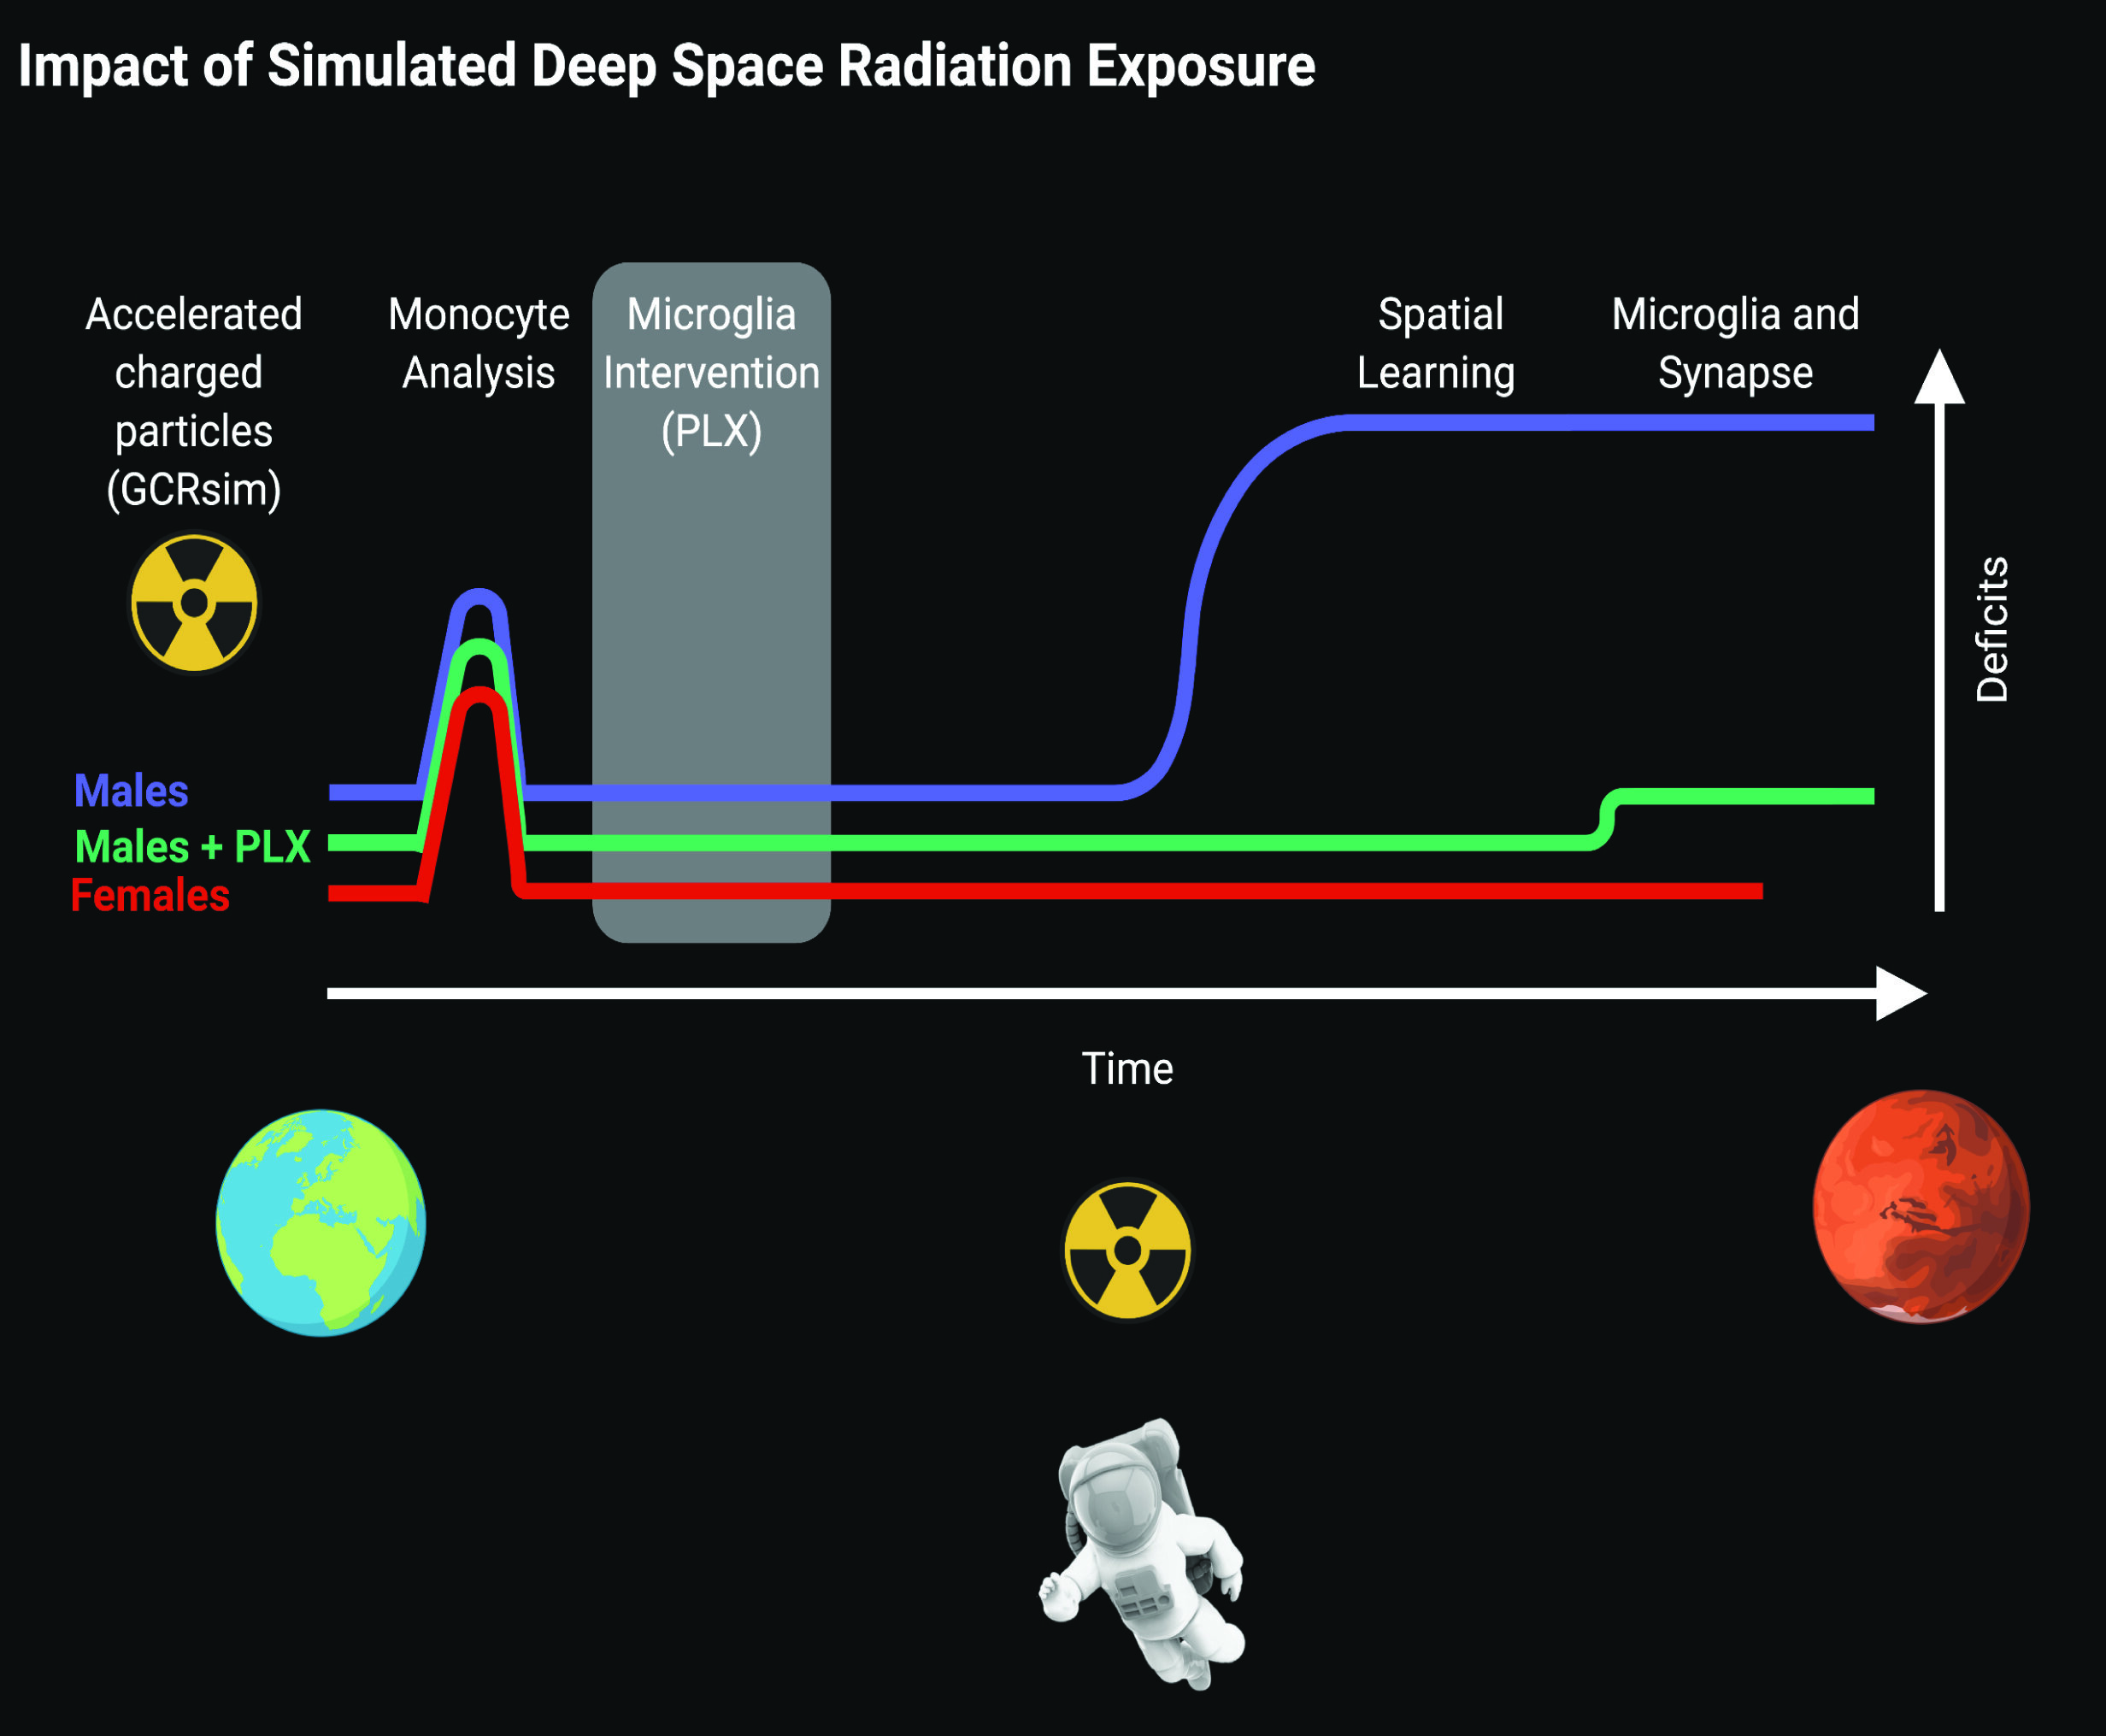 Male mice exposed to simulated deep space radiation experienced impaired spatial learning